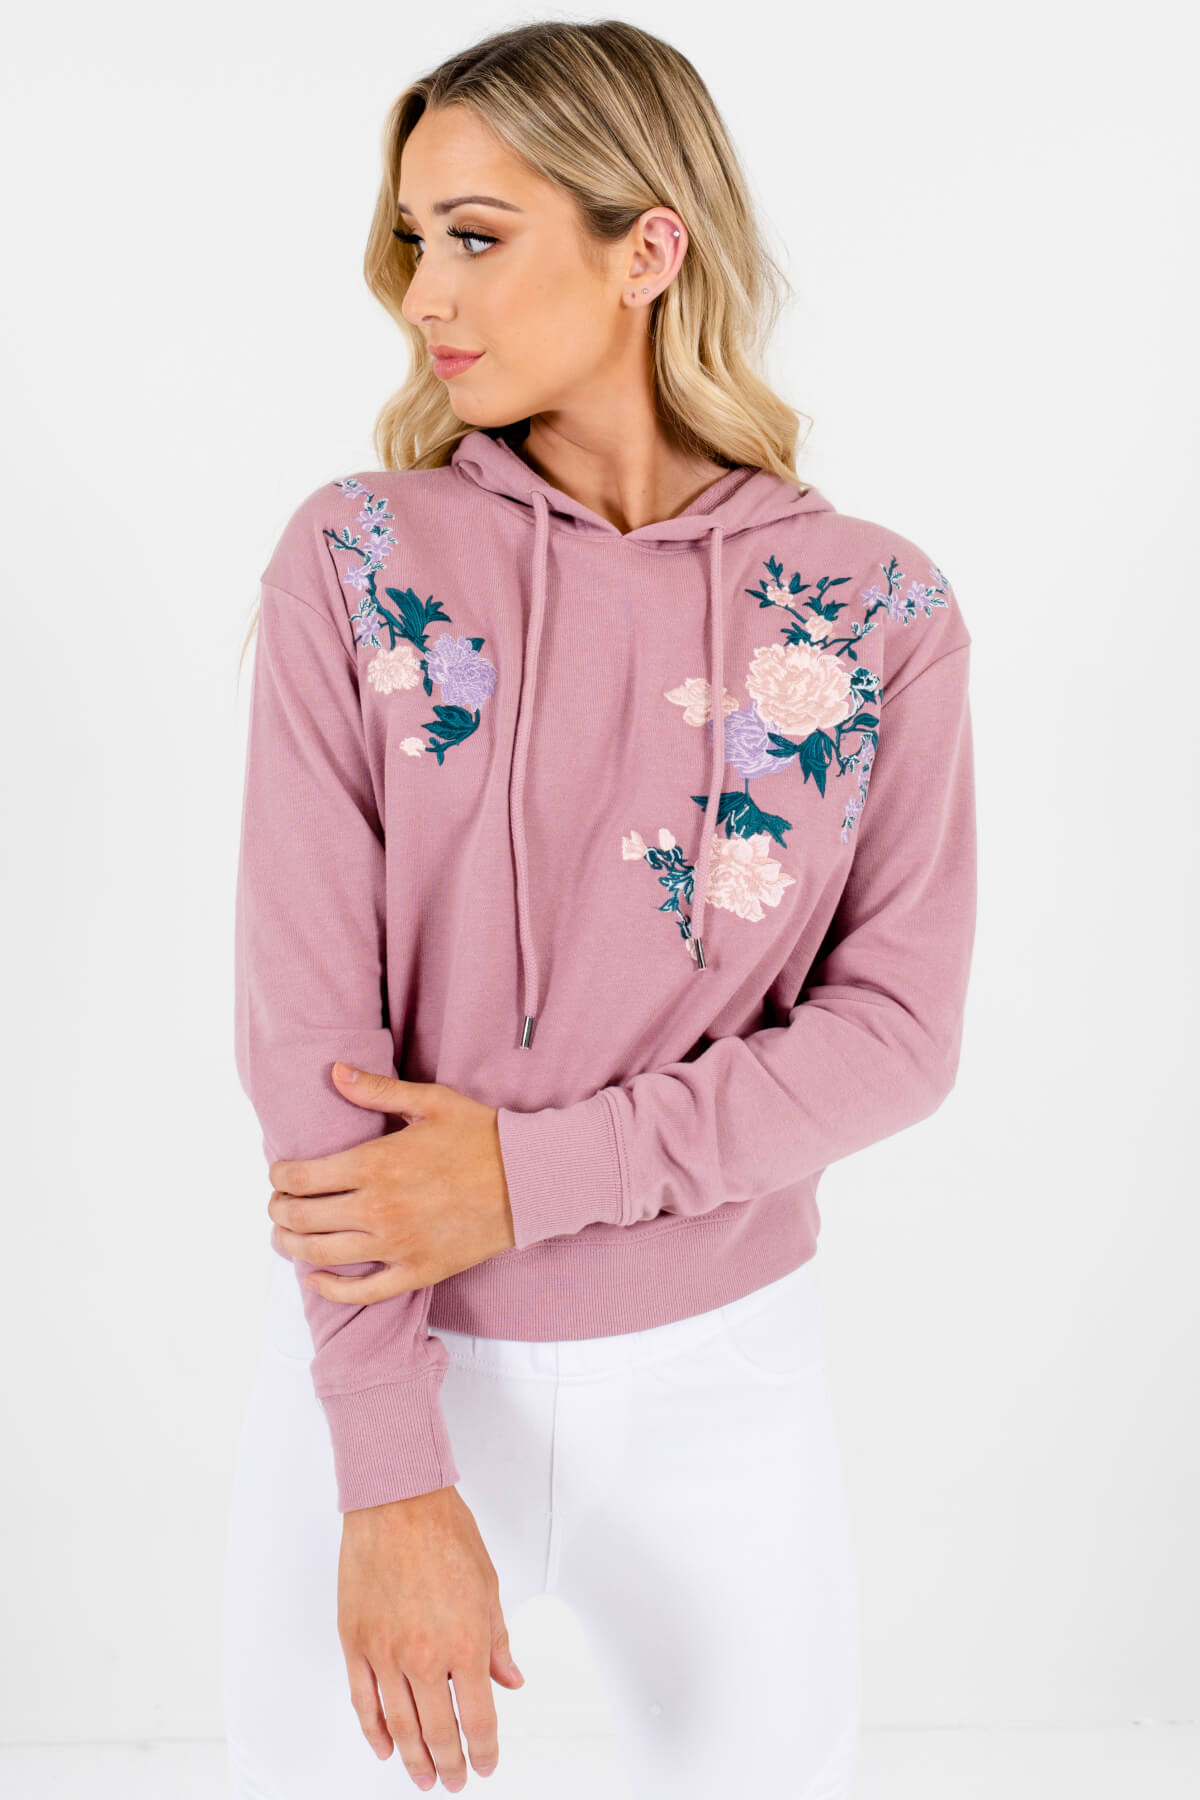 Mauve Purple Pink Green Lavender Floral Embroidered Cropped Hoodies